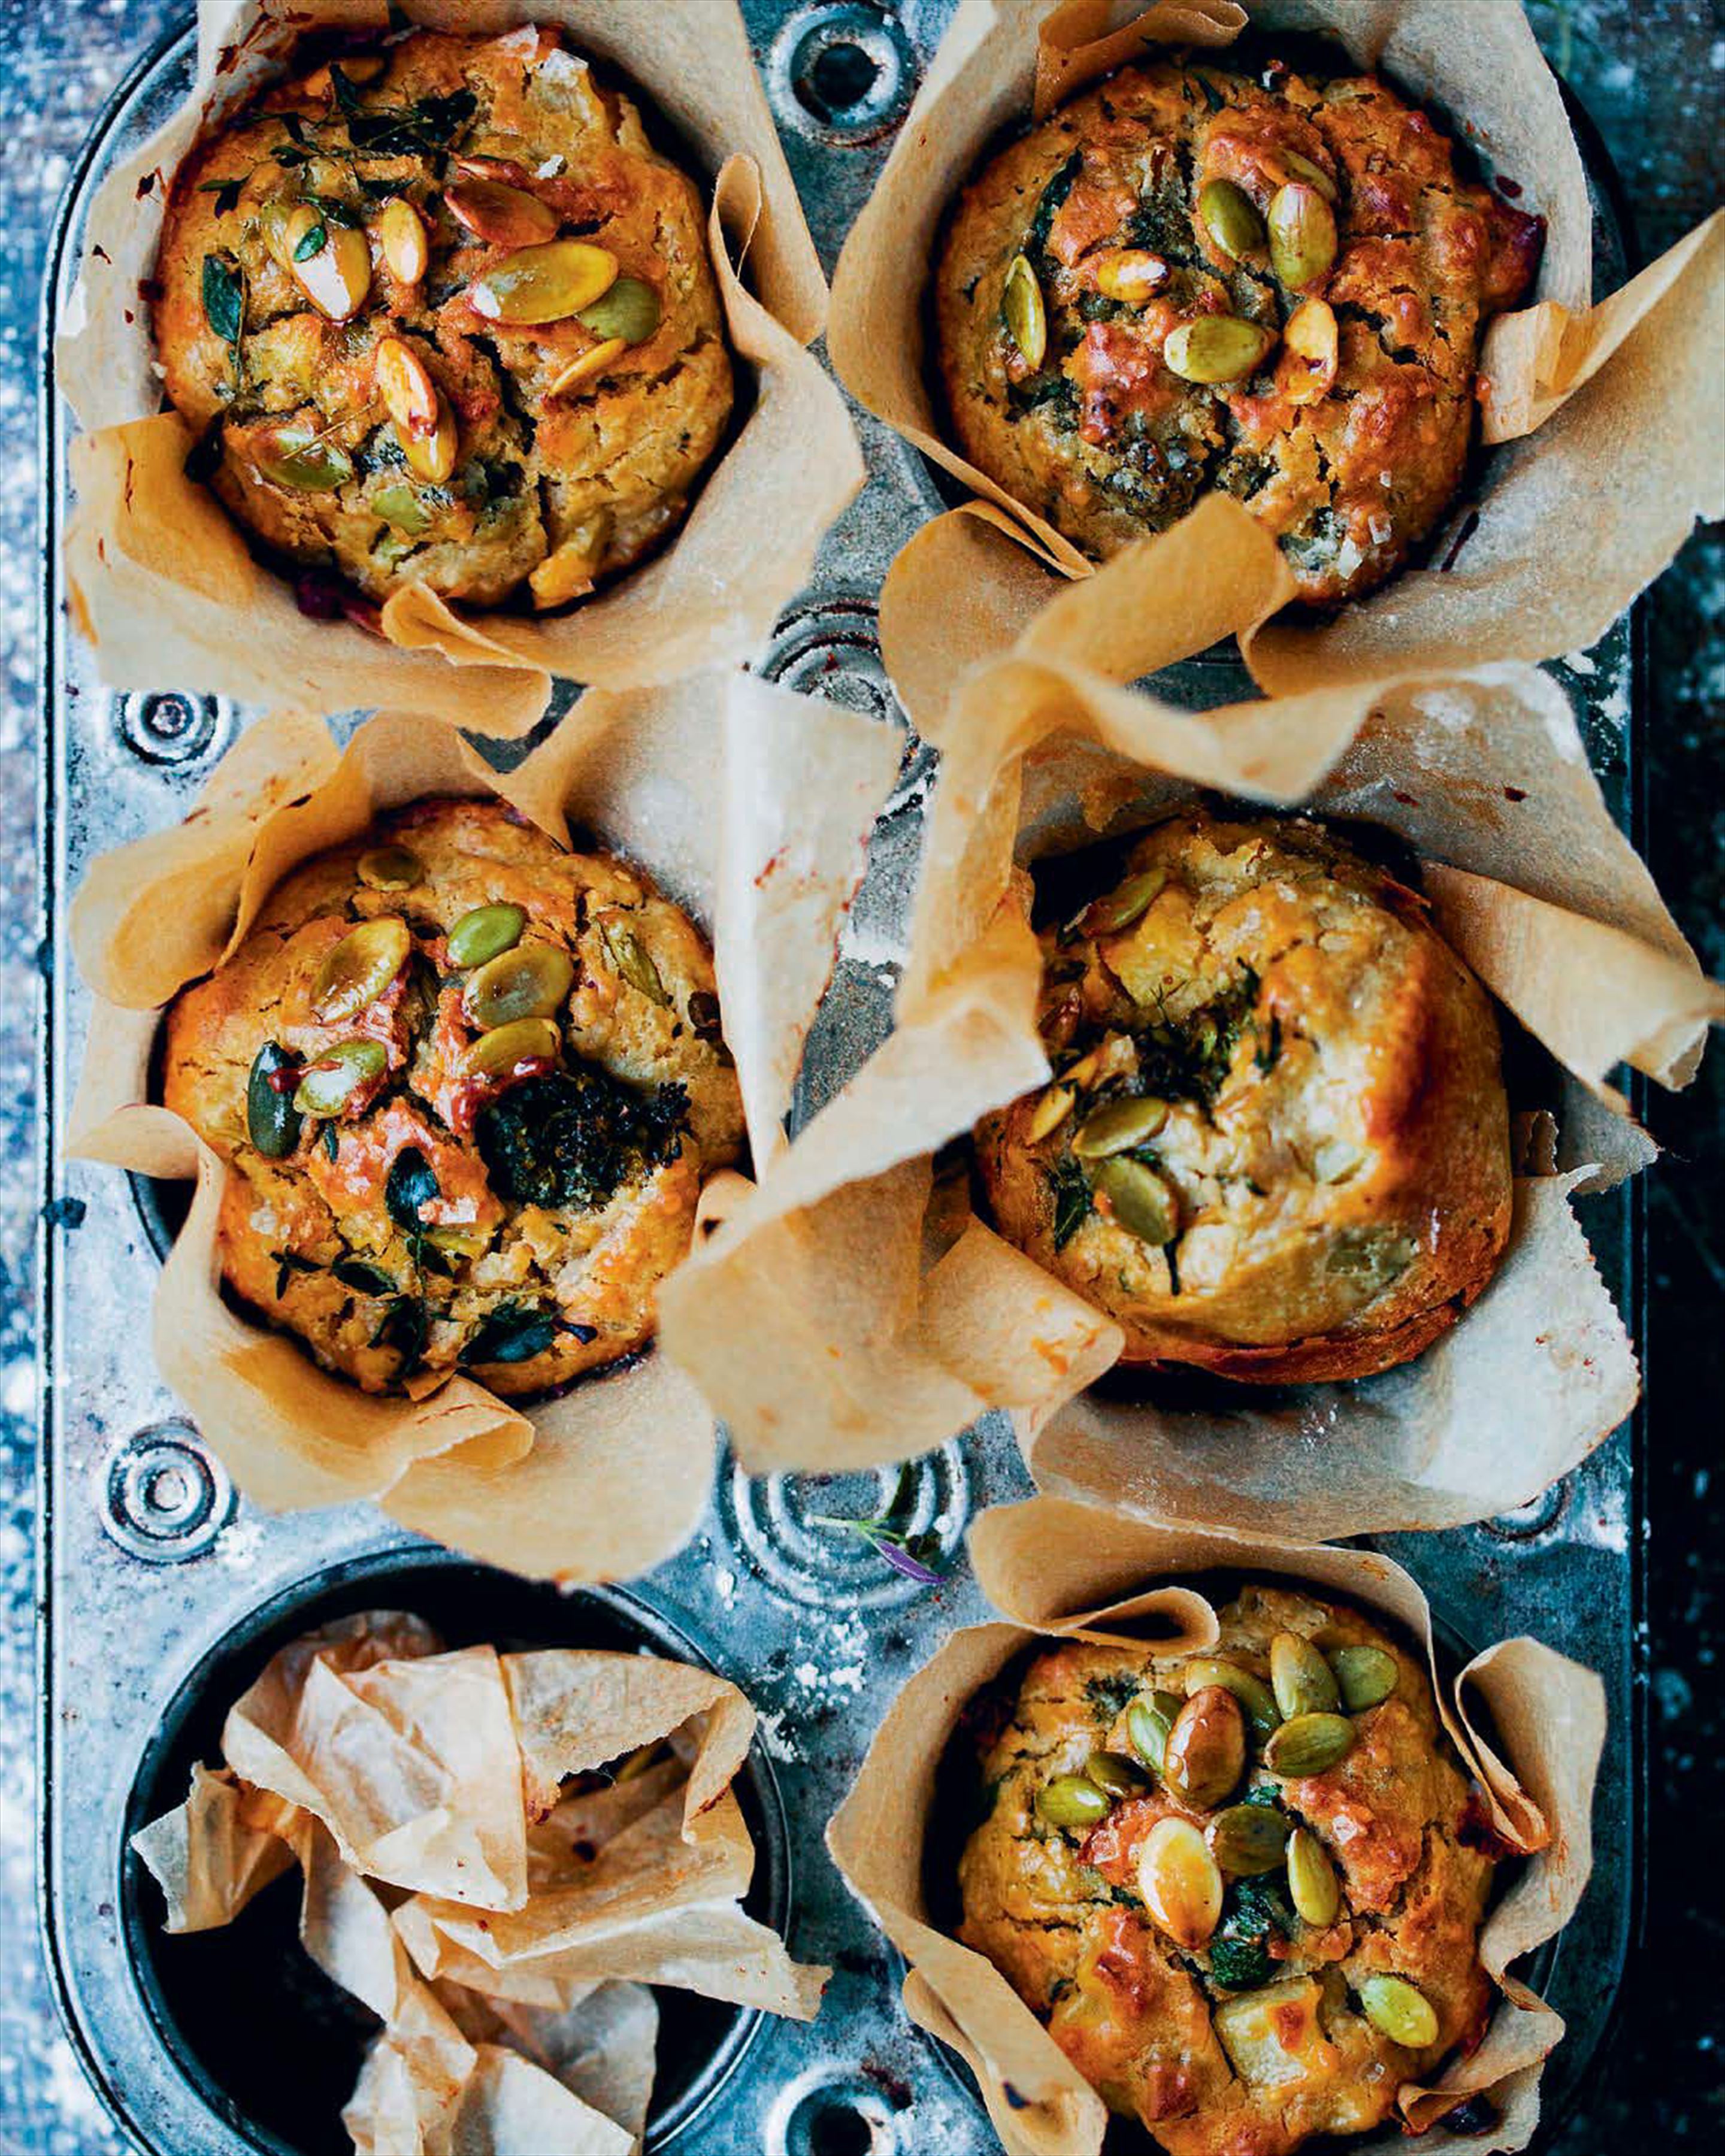 Broccoli, spinach and apple muffins